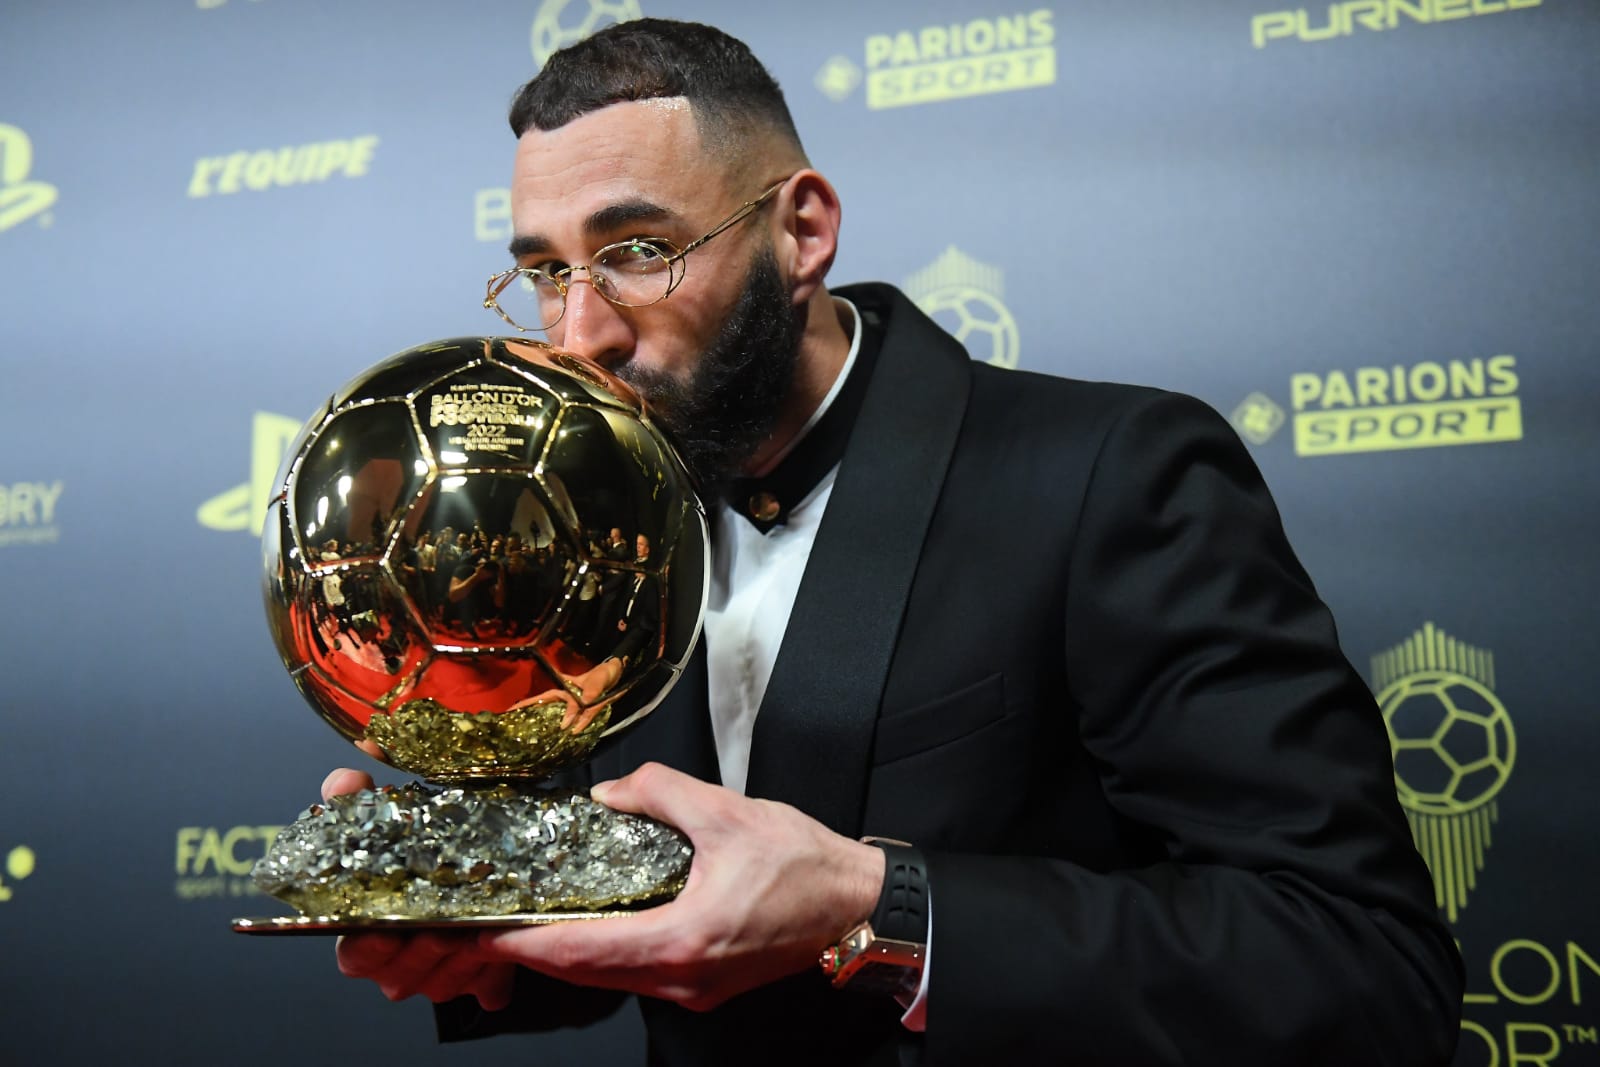 Ballon d'Or: Karim Benzema WINS Ballon d'Or, Real Madrid Forward Becomes BEST Player of the Year- Check Out